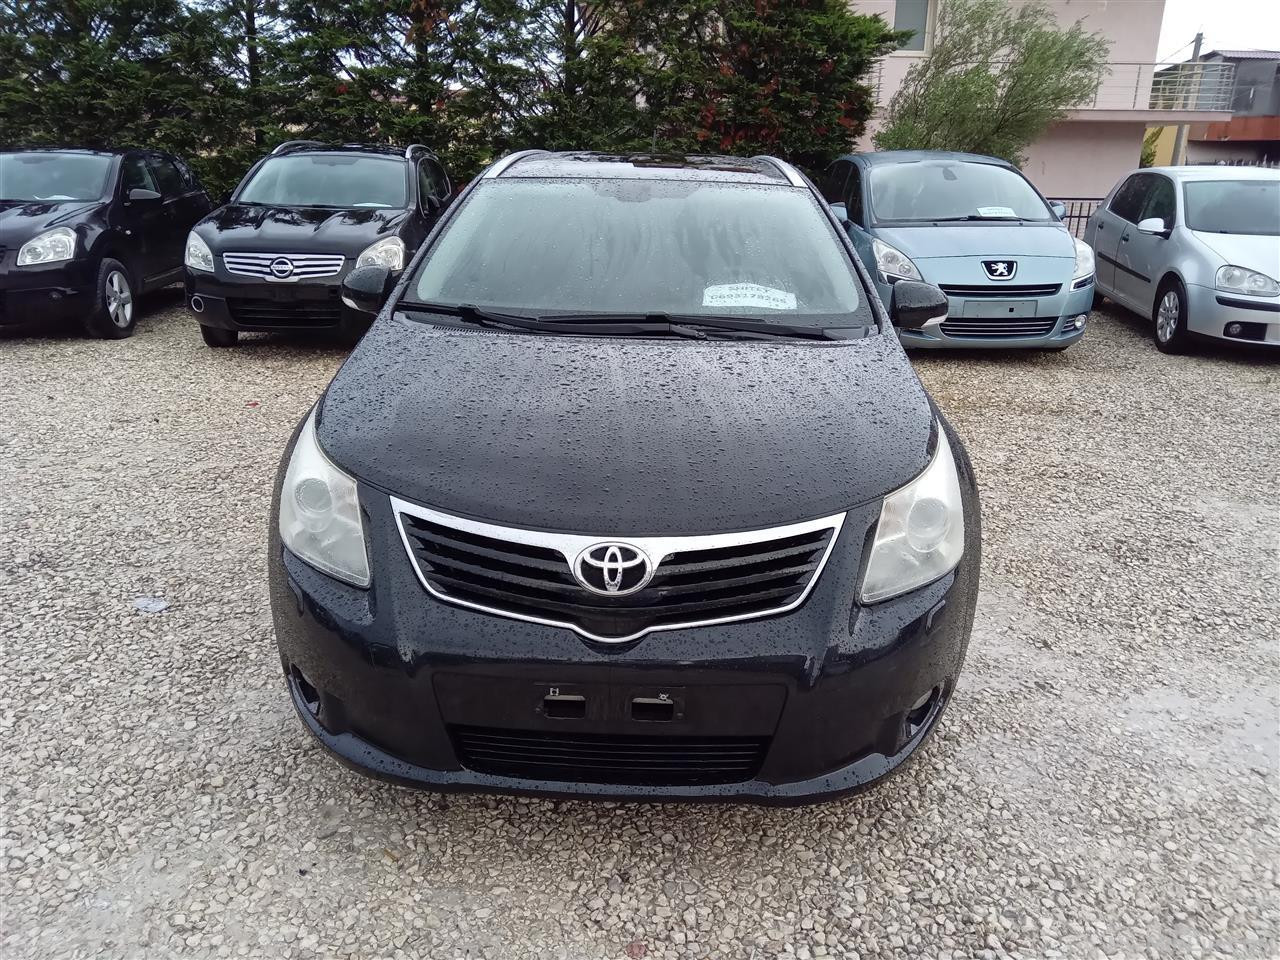 TOYOTA AVENSIS. 2.2 NAFTE. AUTOMAT